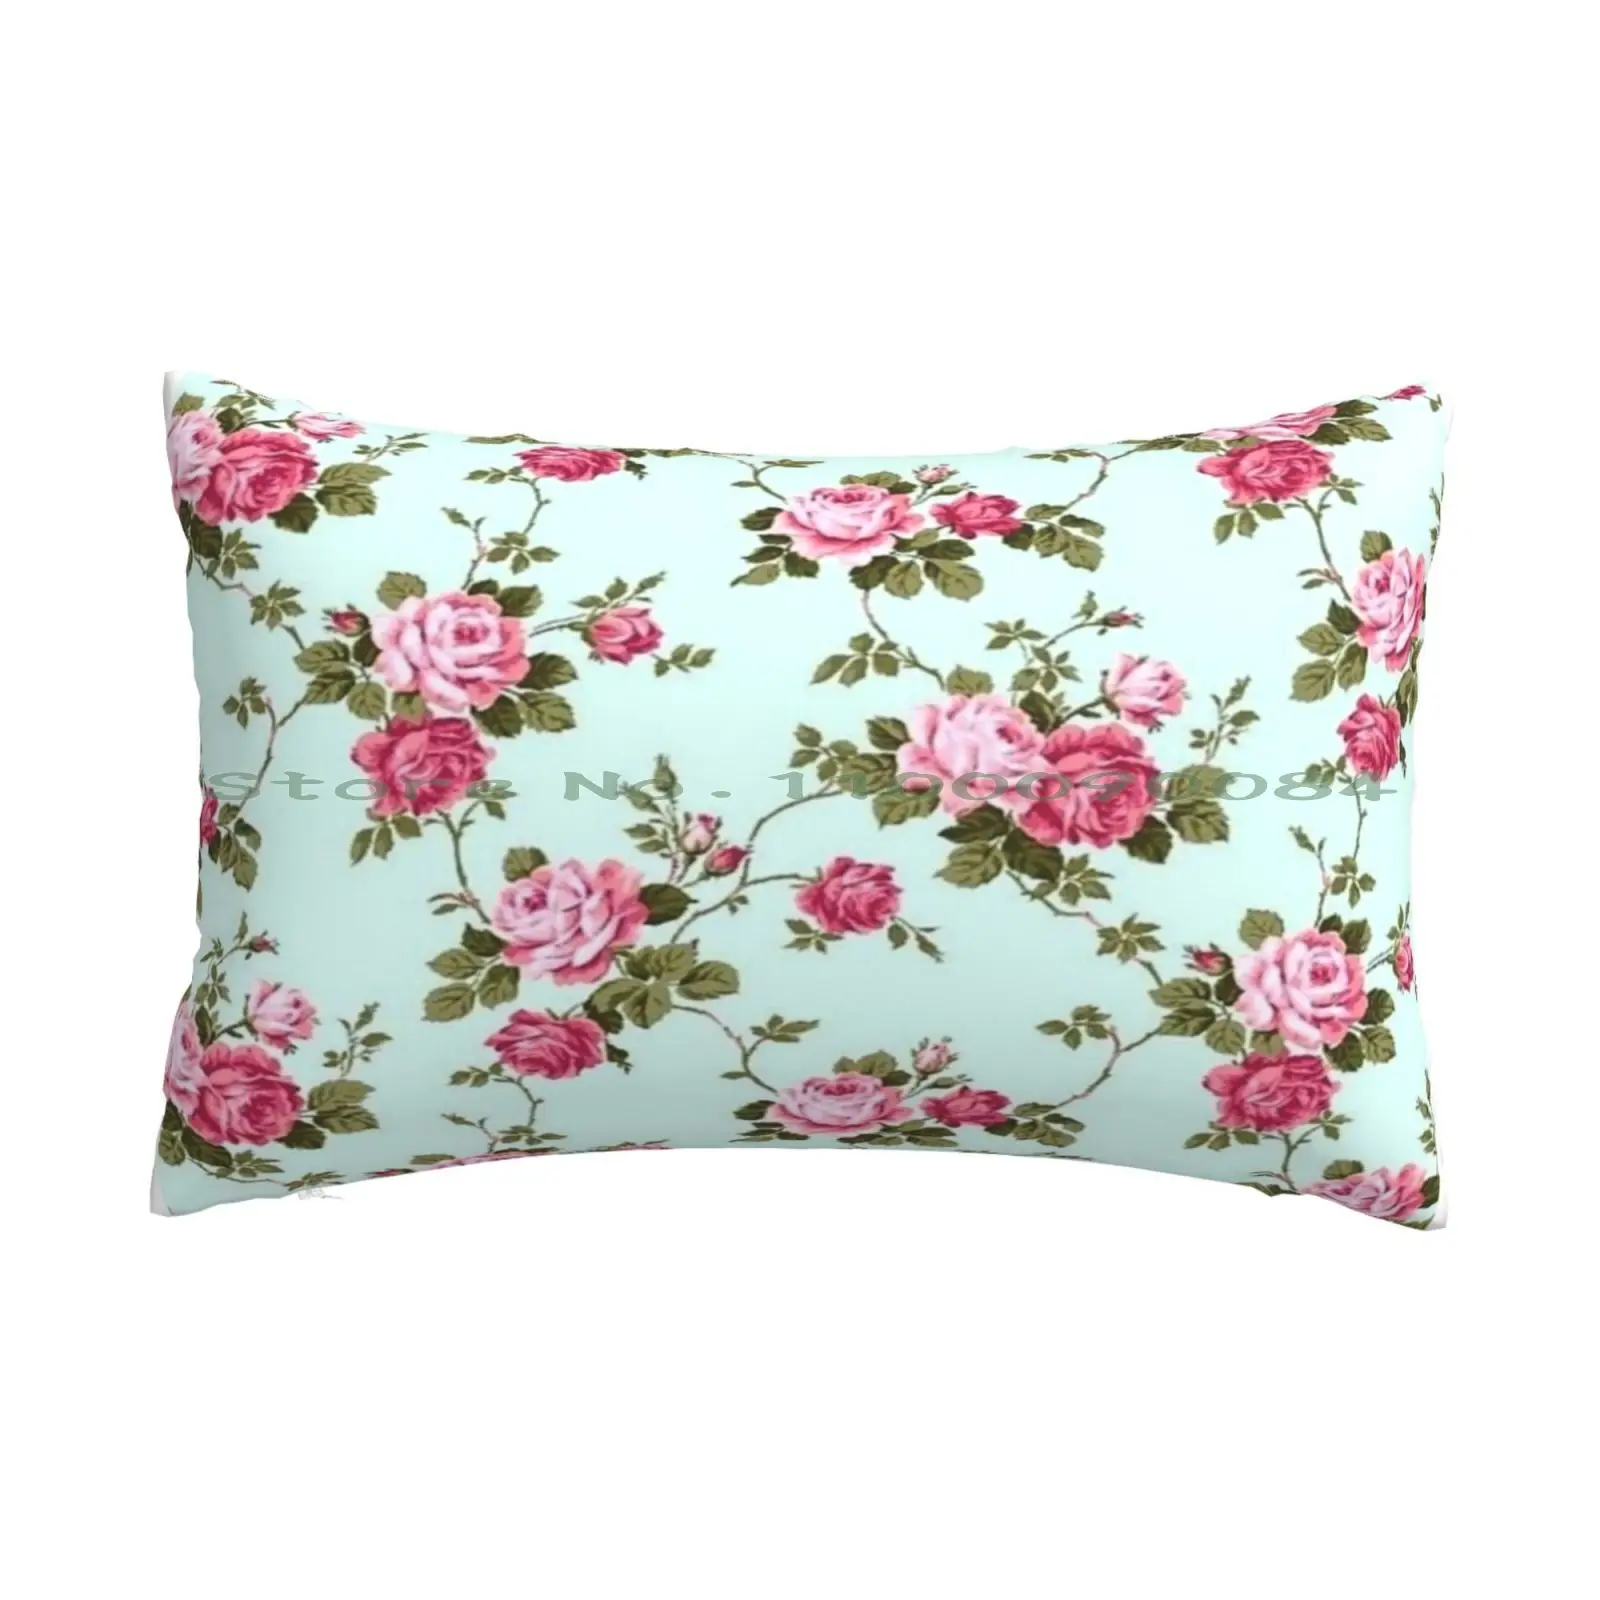 - Flowers Pillow Case 20x30 50*75 Sofa Bedroom Pattern Pretty Vintag Pink Girly Roses Shabby Chic Cute Kitsch Nature Repeat